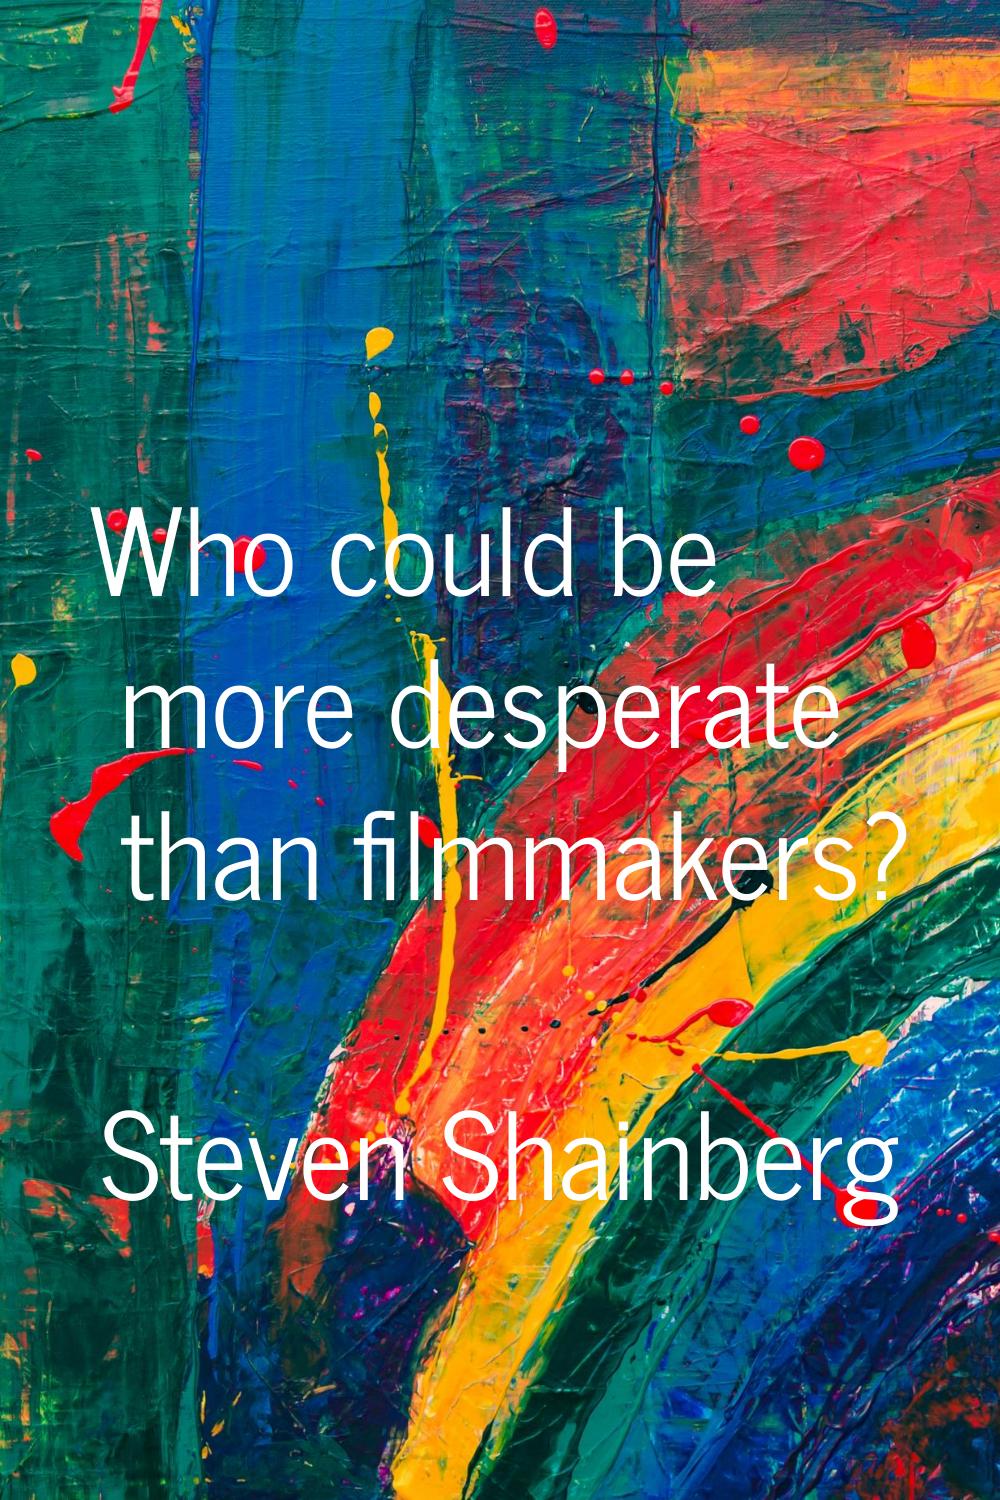 Who could be more desperate than filmmakers?